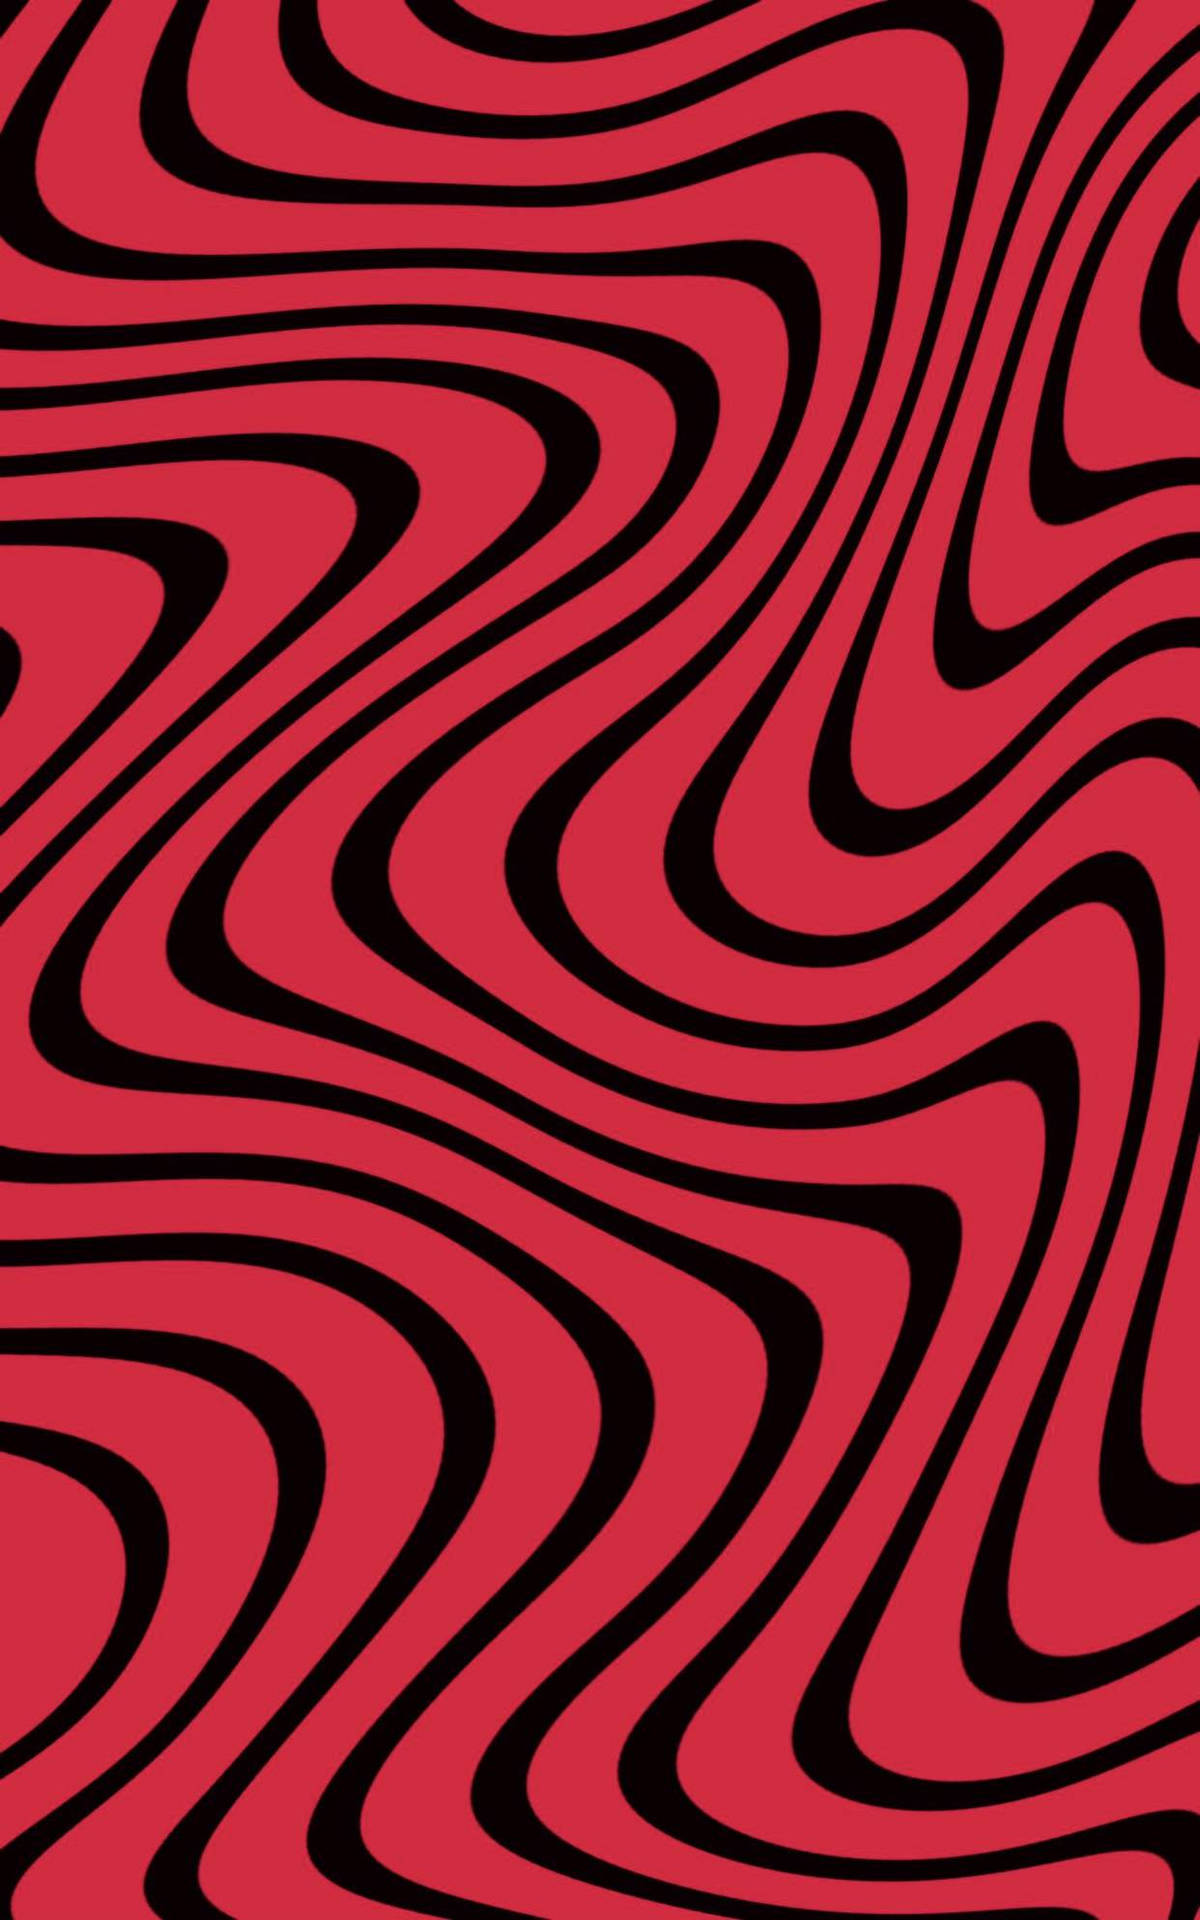 Download PewDiePie gaming and entertainment background | Wallpapers.com